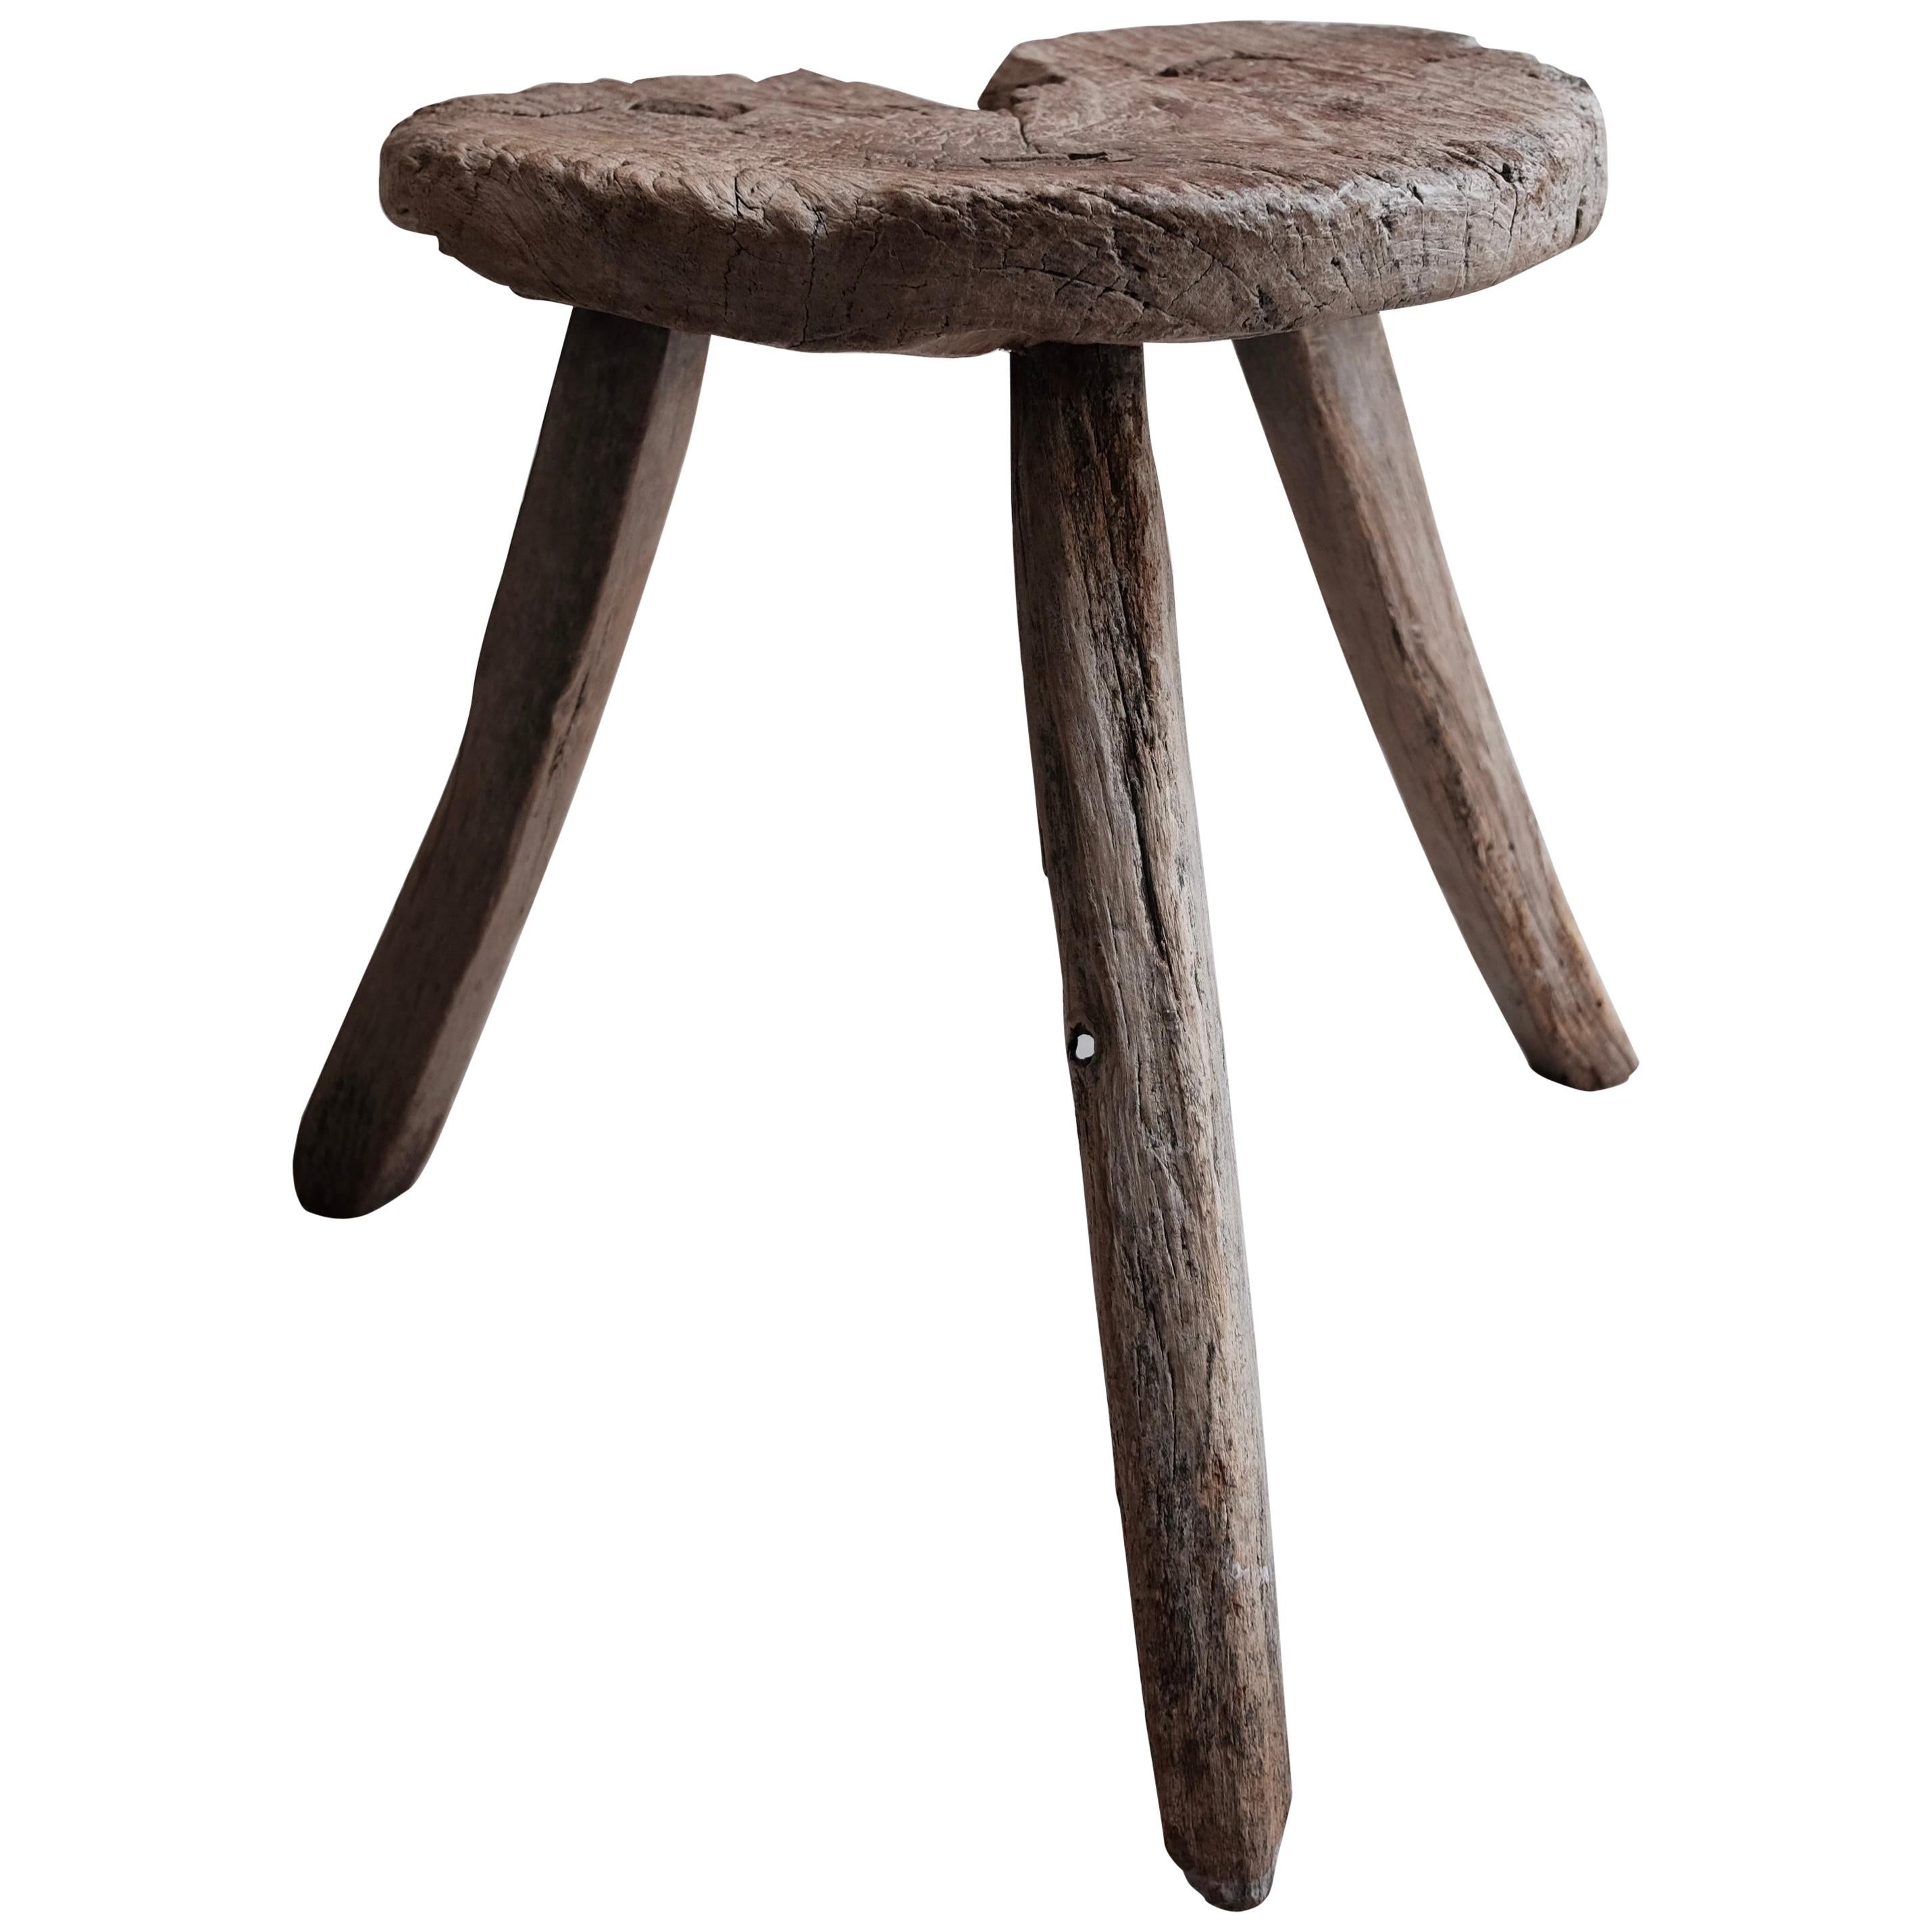 Mesquite Stool from Mexico, 1950s